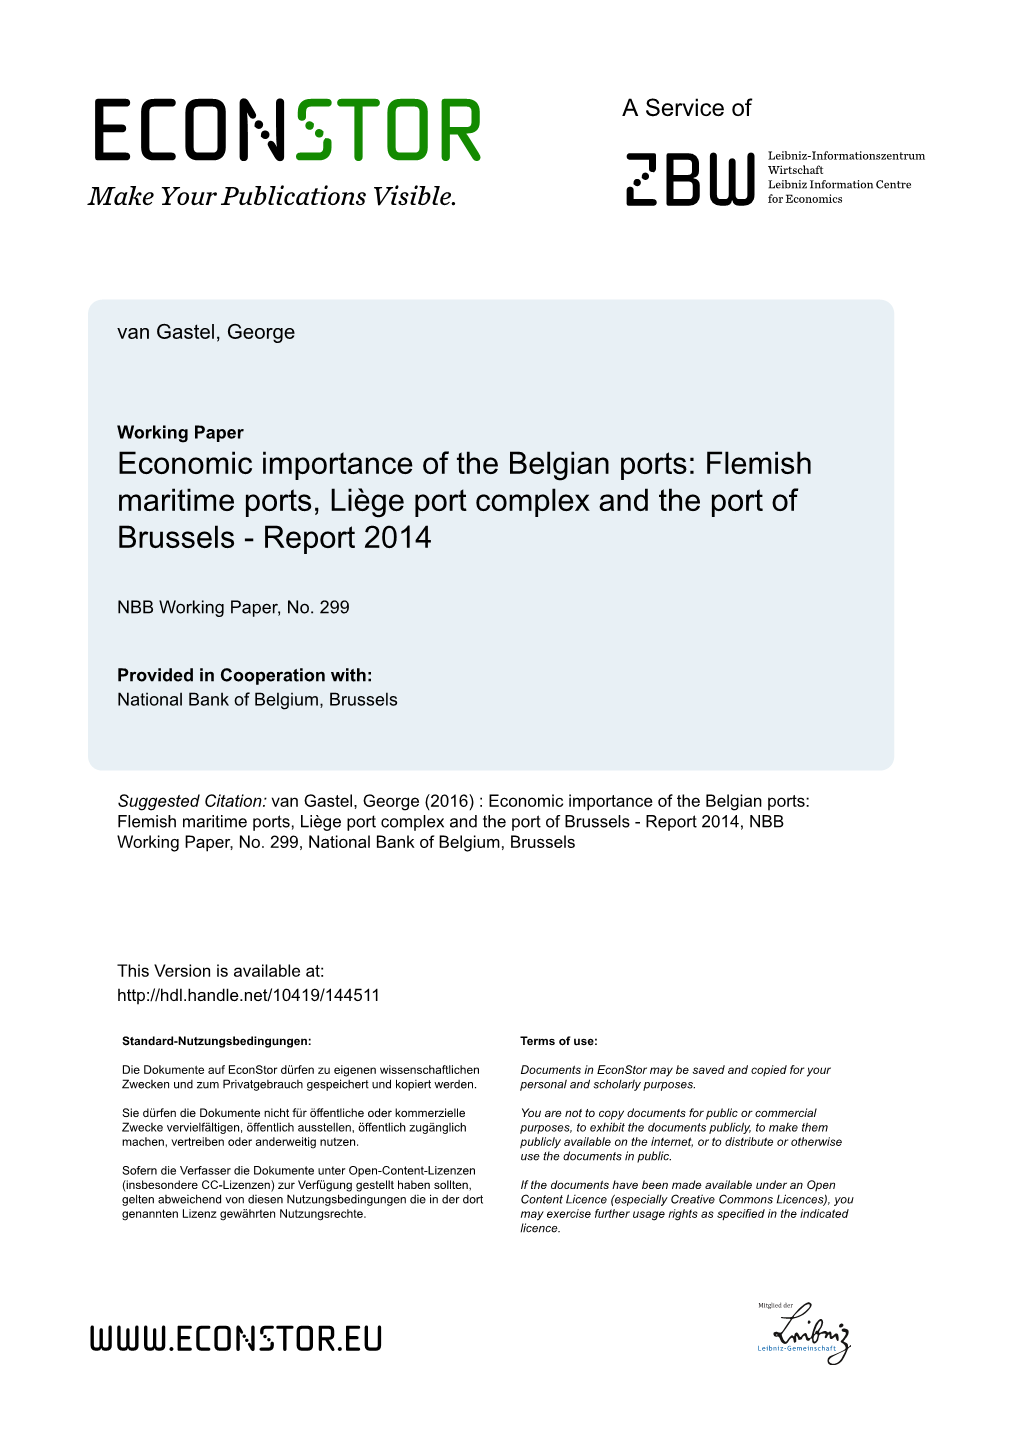 Economic Importance of the Belgian Ports: Flemish Maritime Ports, Liège Port Complex and the Port of Brussels - Report 2014